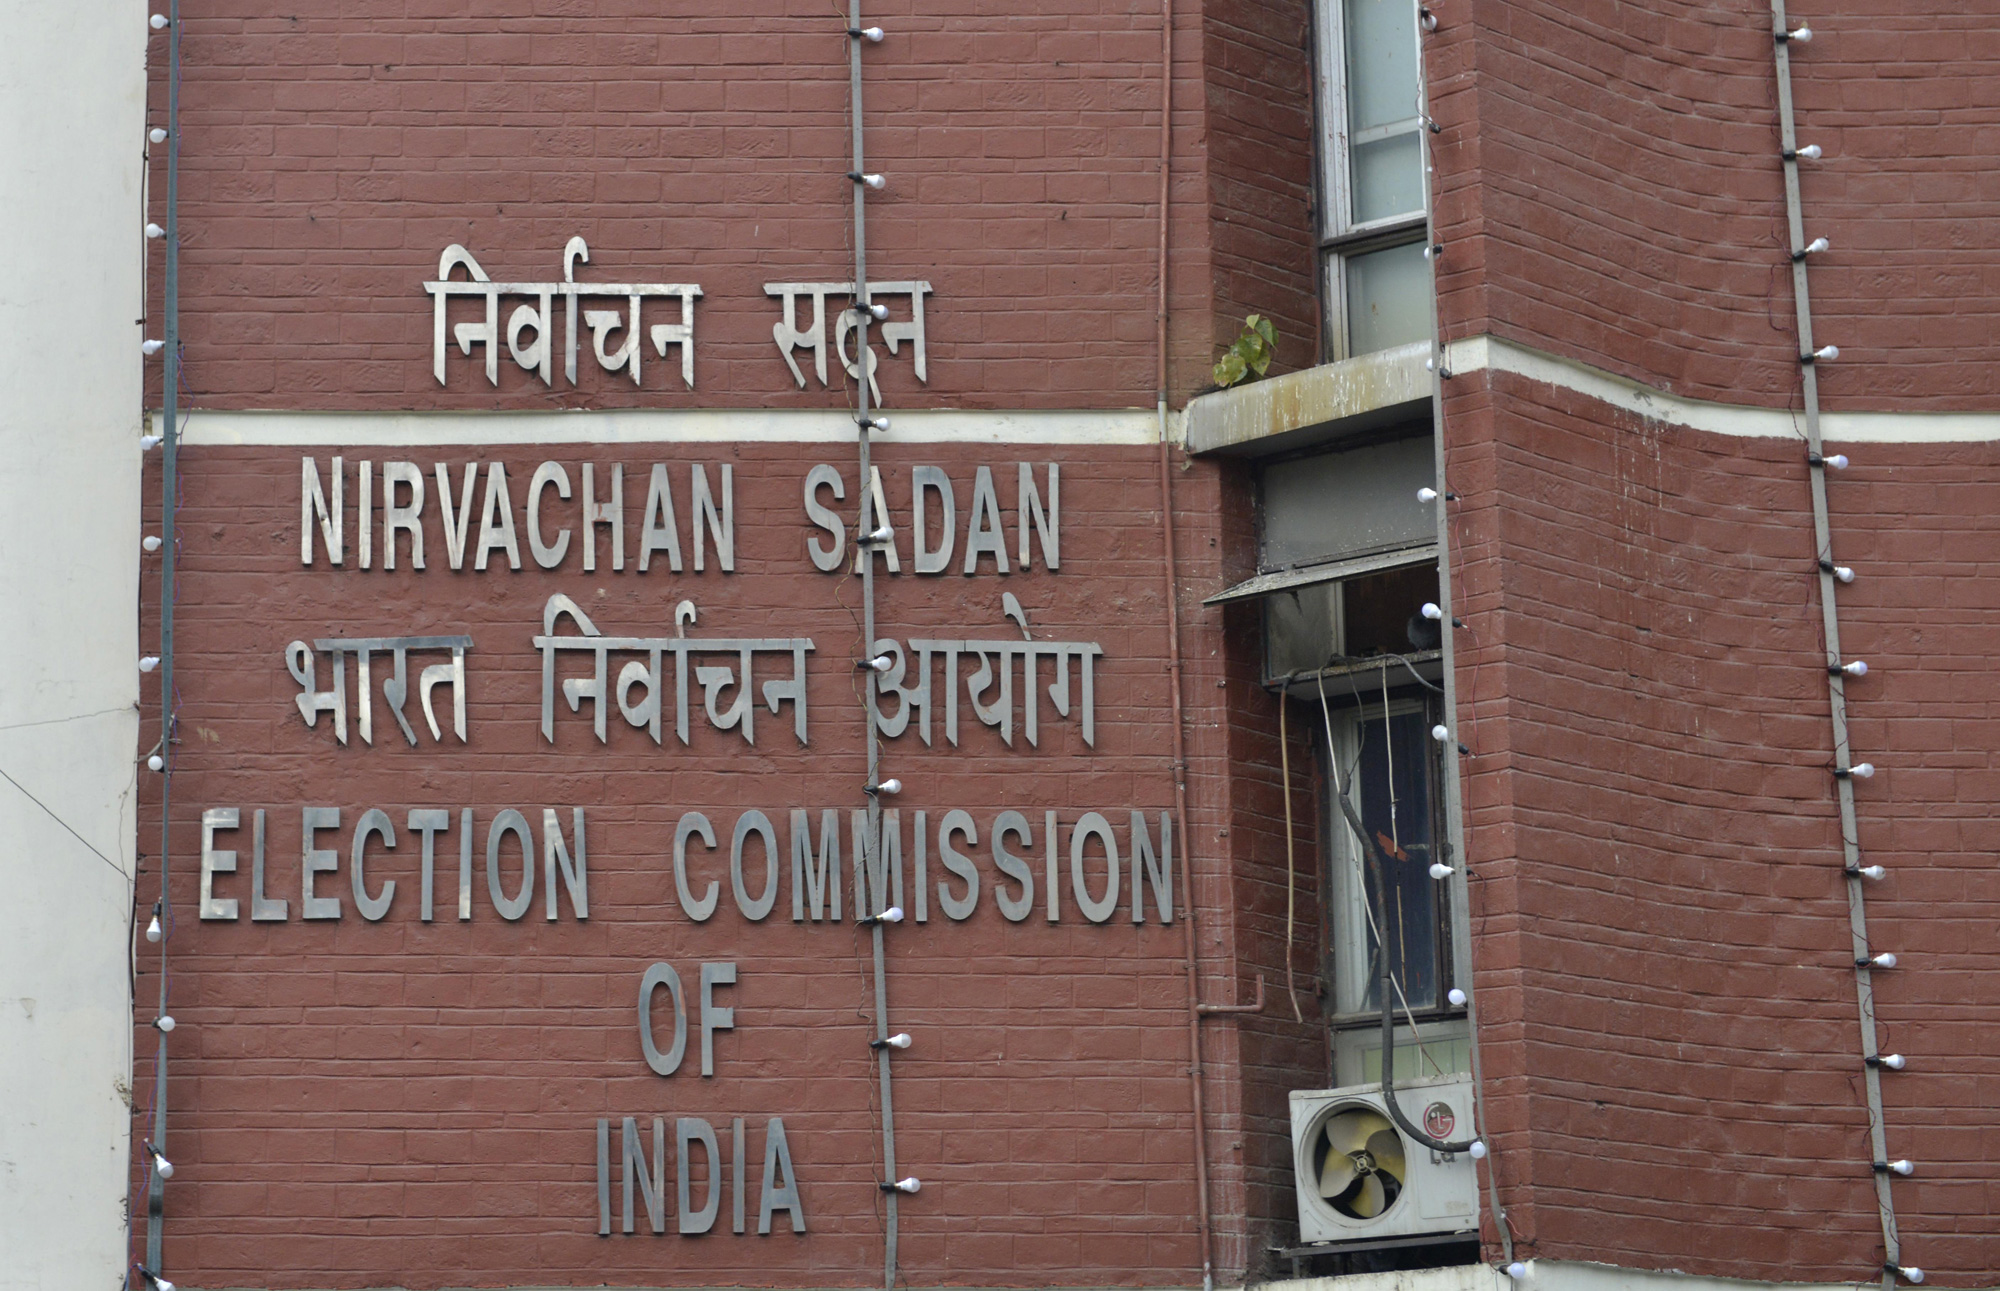 Election Commission of India | Hearing on Nov 15, says poll panel ...